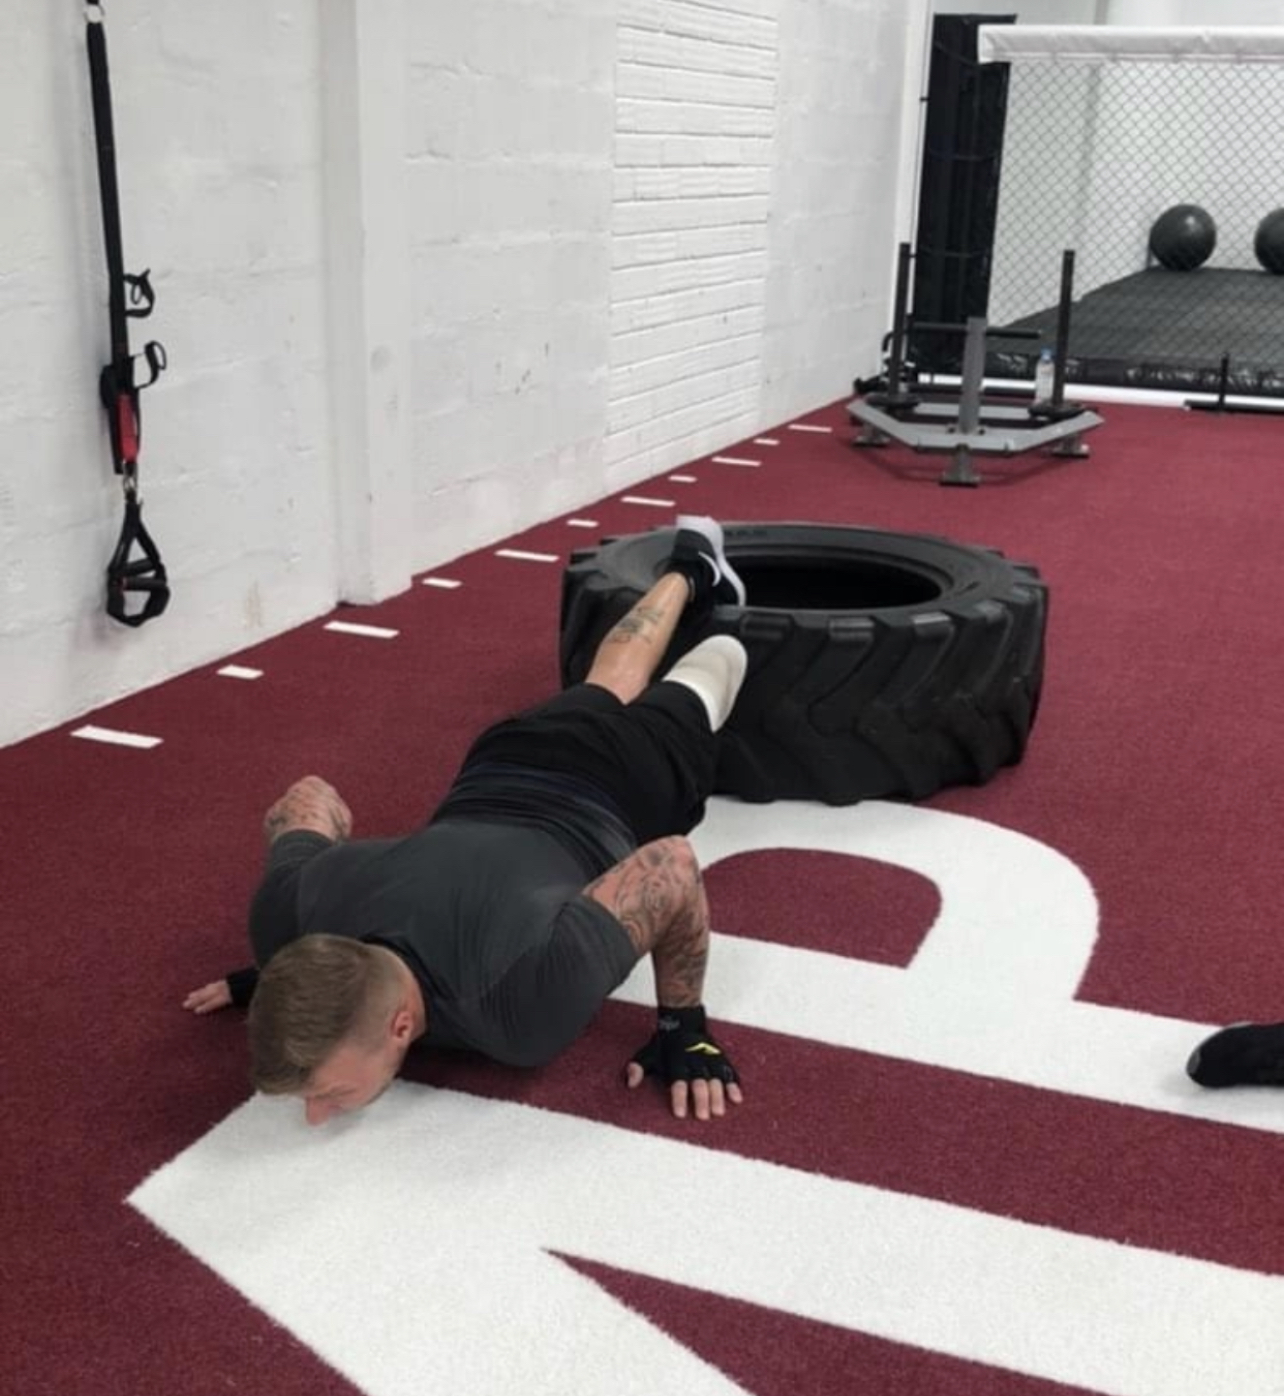 Man doing a push-up, with a tyre near his foot